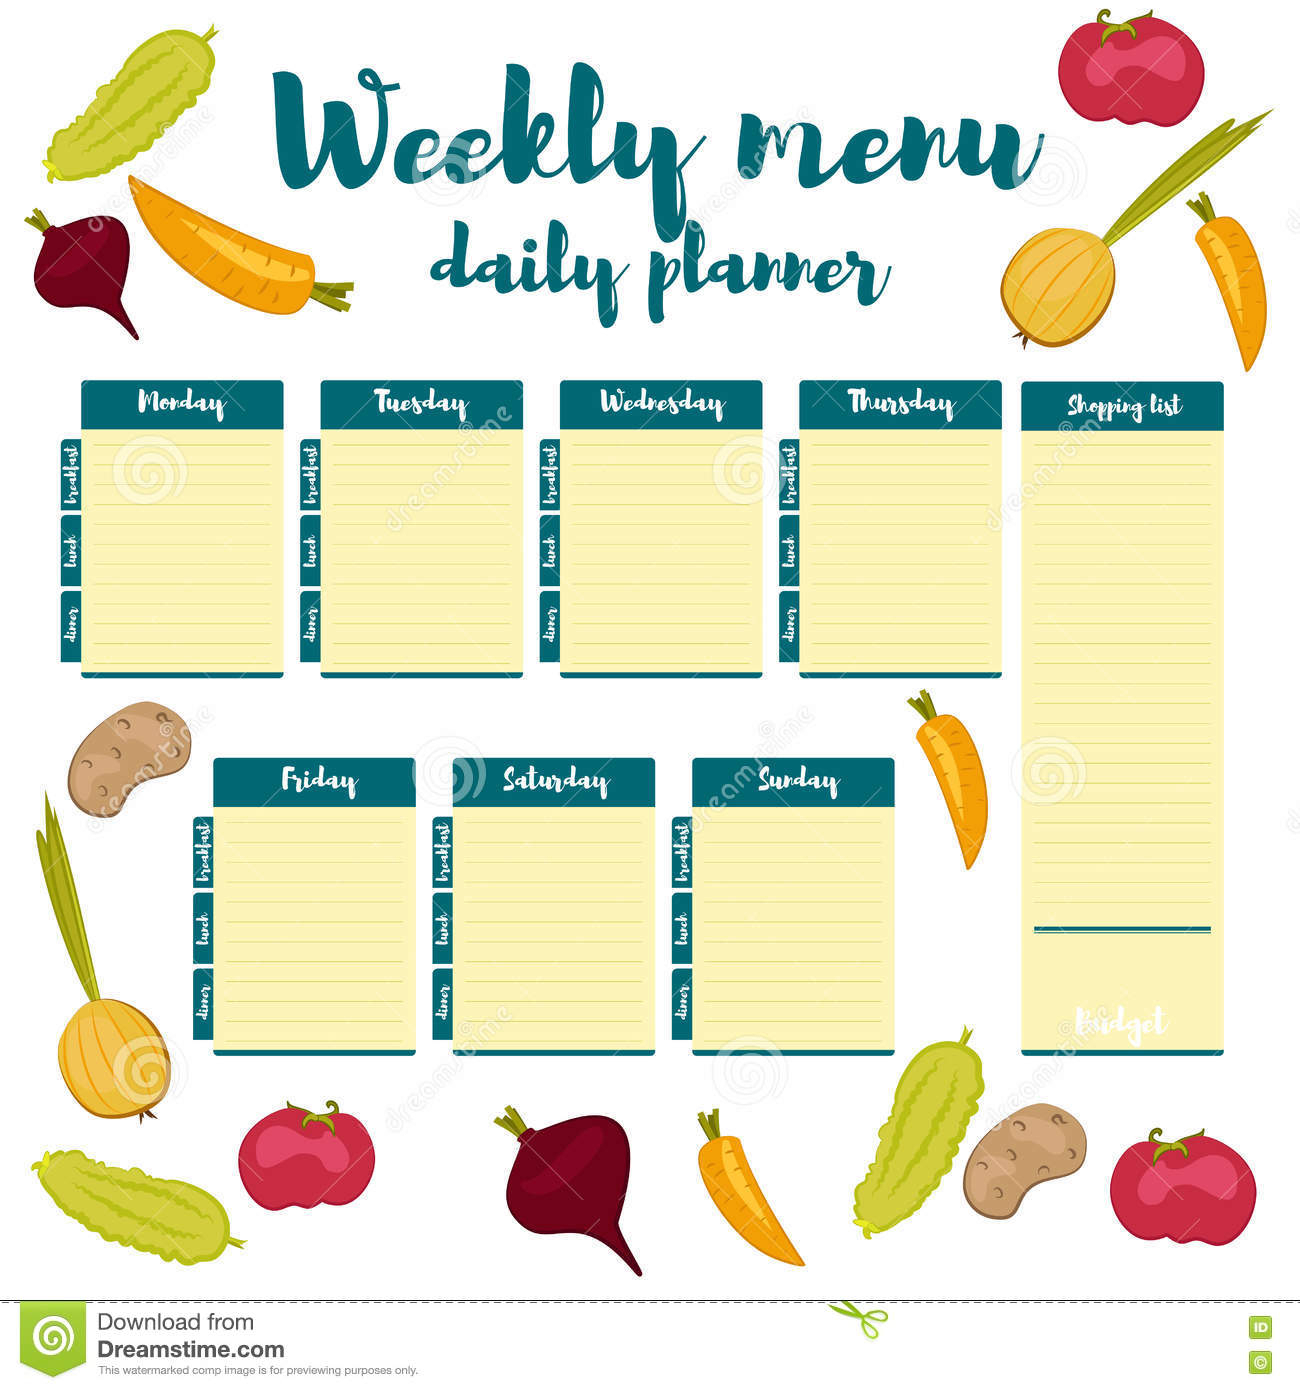 Weekly Menu Template Free Food Word Blank Download Html Intended For Menu Templates For Publisher